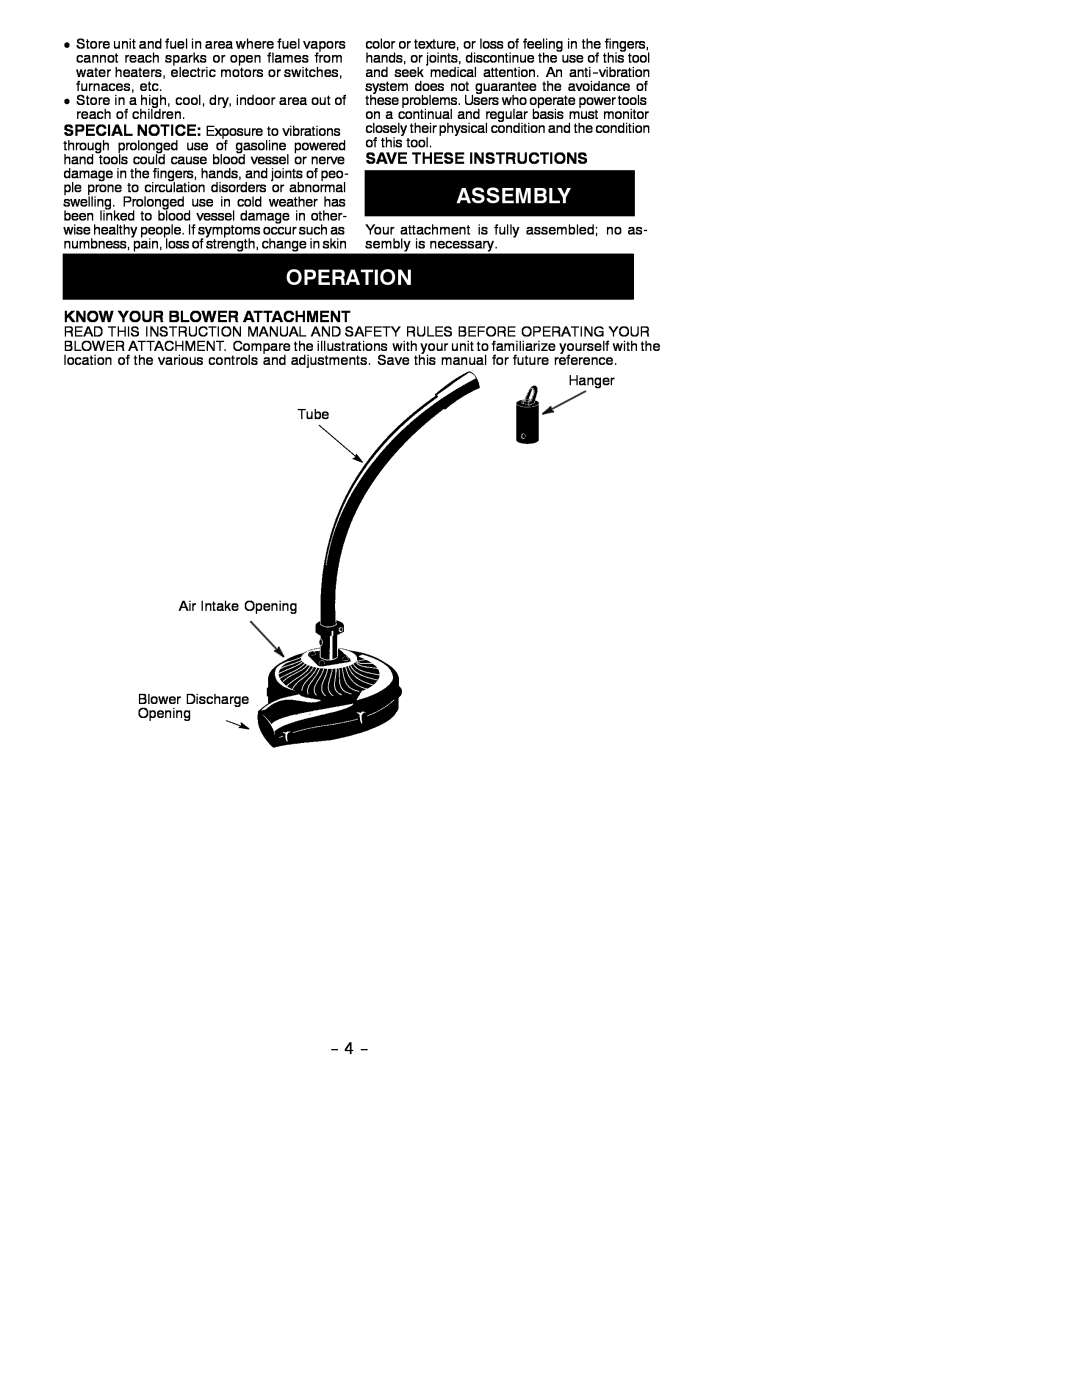 Poulan PP3000B instruction manual Save These Instructions, Know Your Blower Attachment 